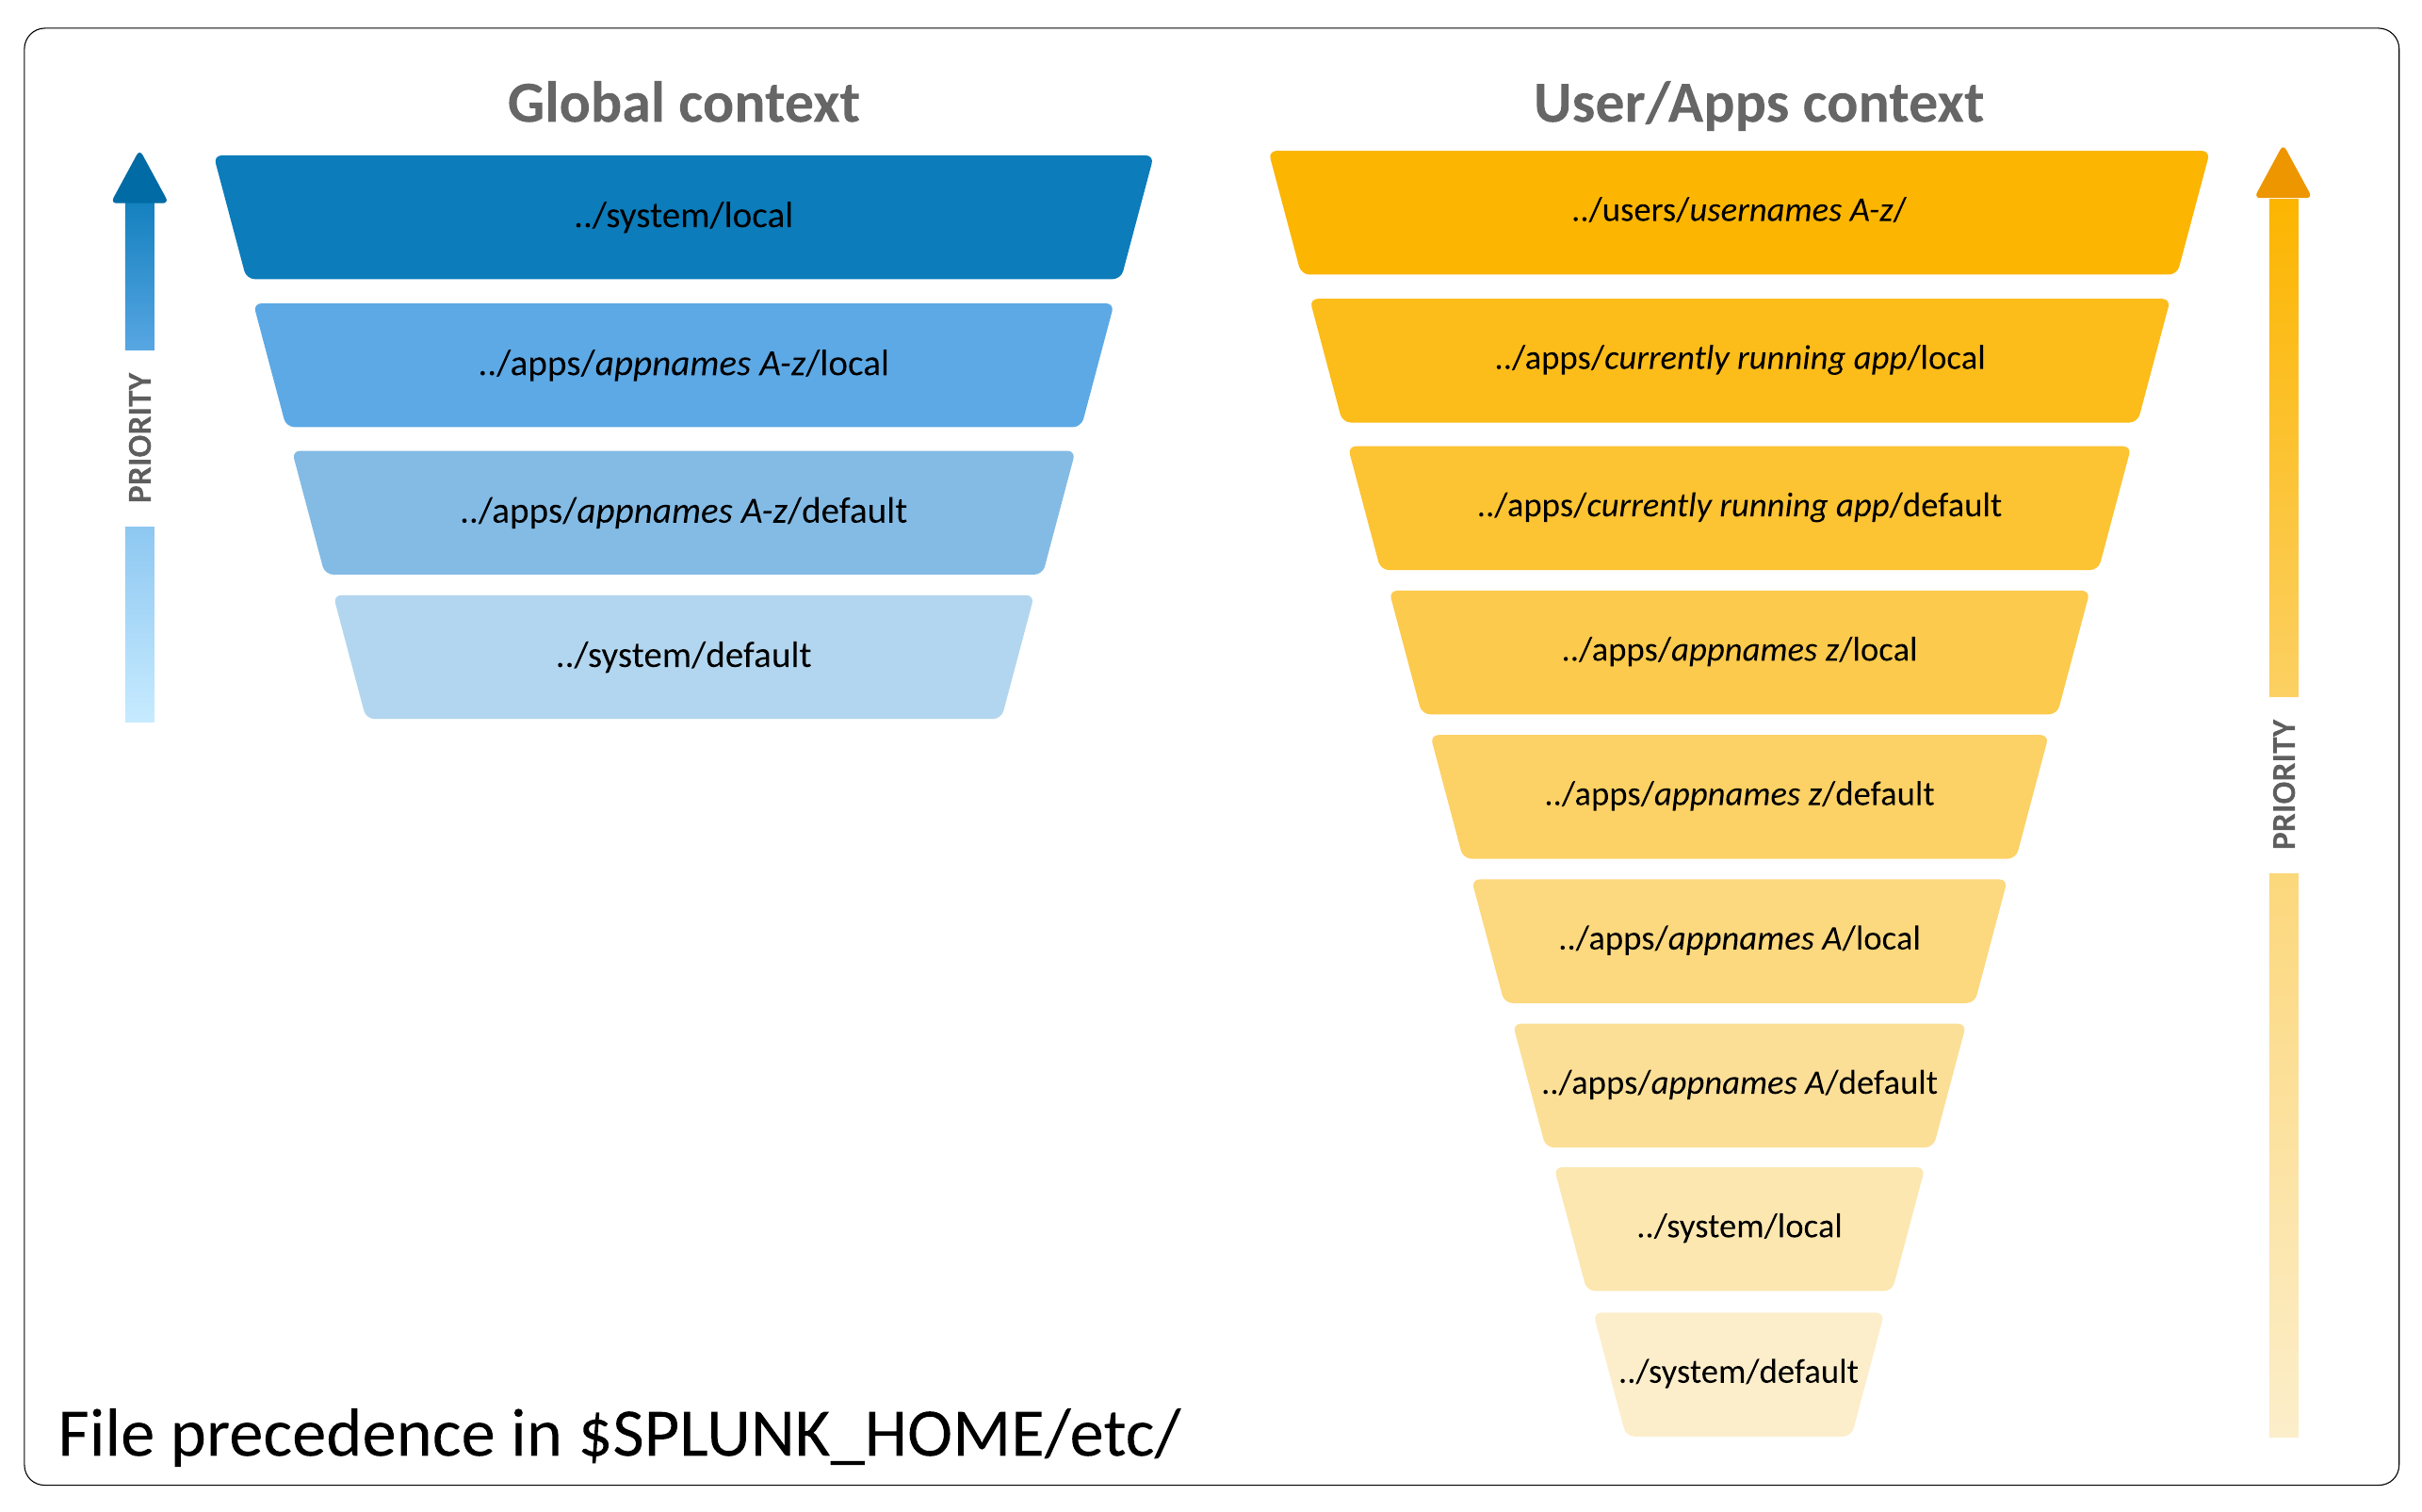 Flowchart showing the hierarchy and priority of configuration file locations in Splunk's global and user/app contexts.